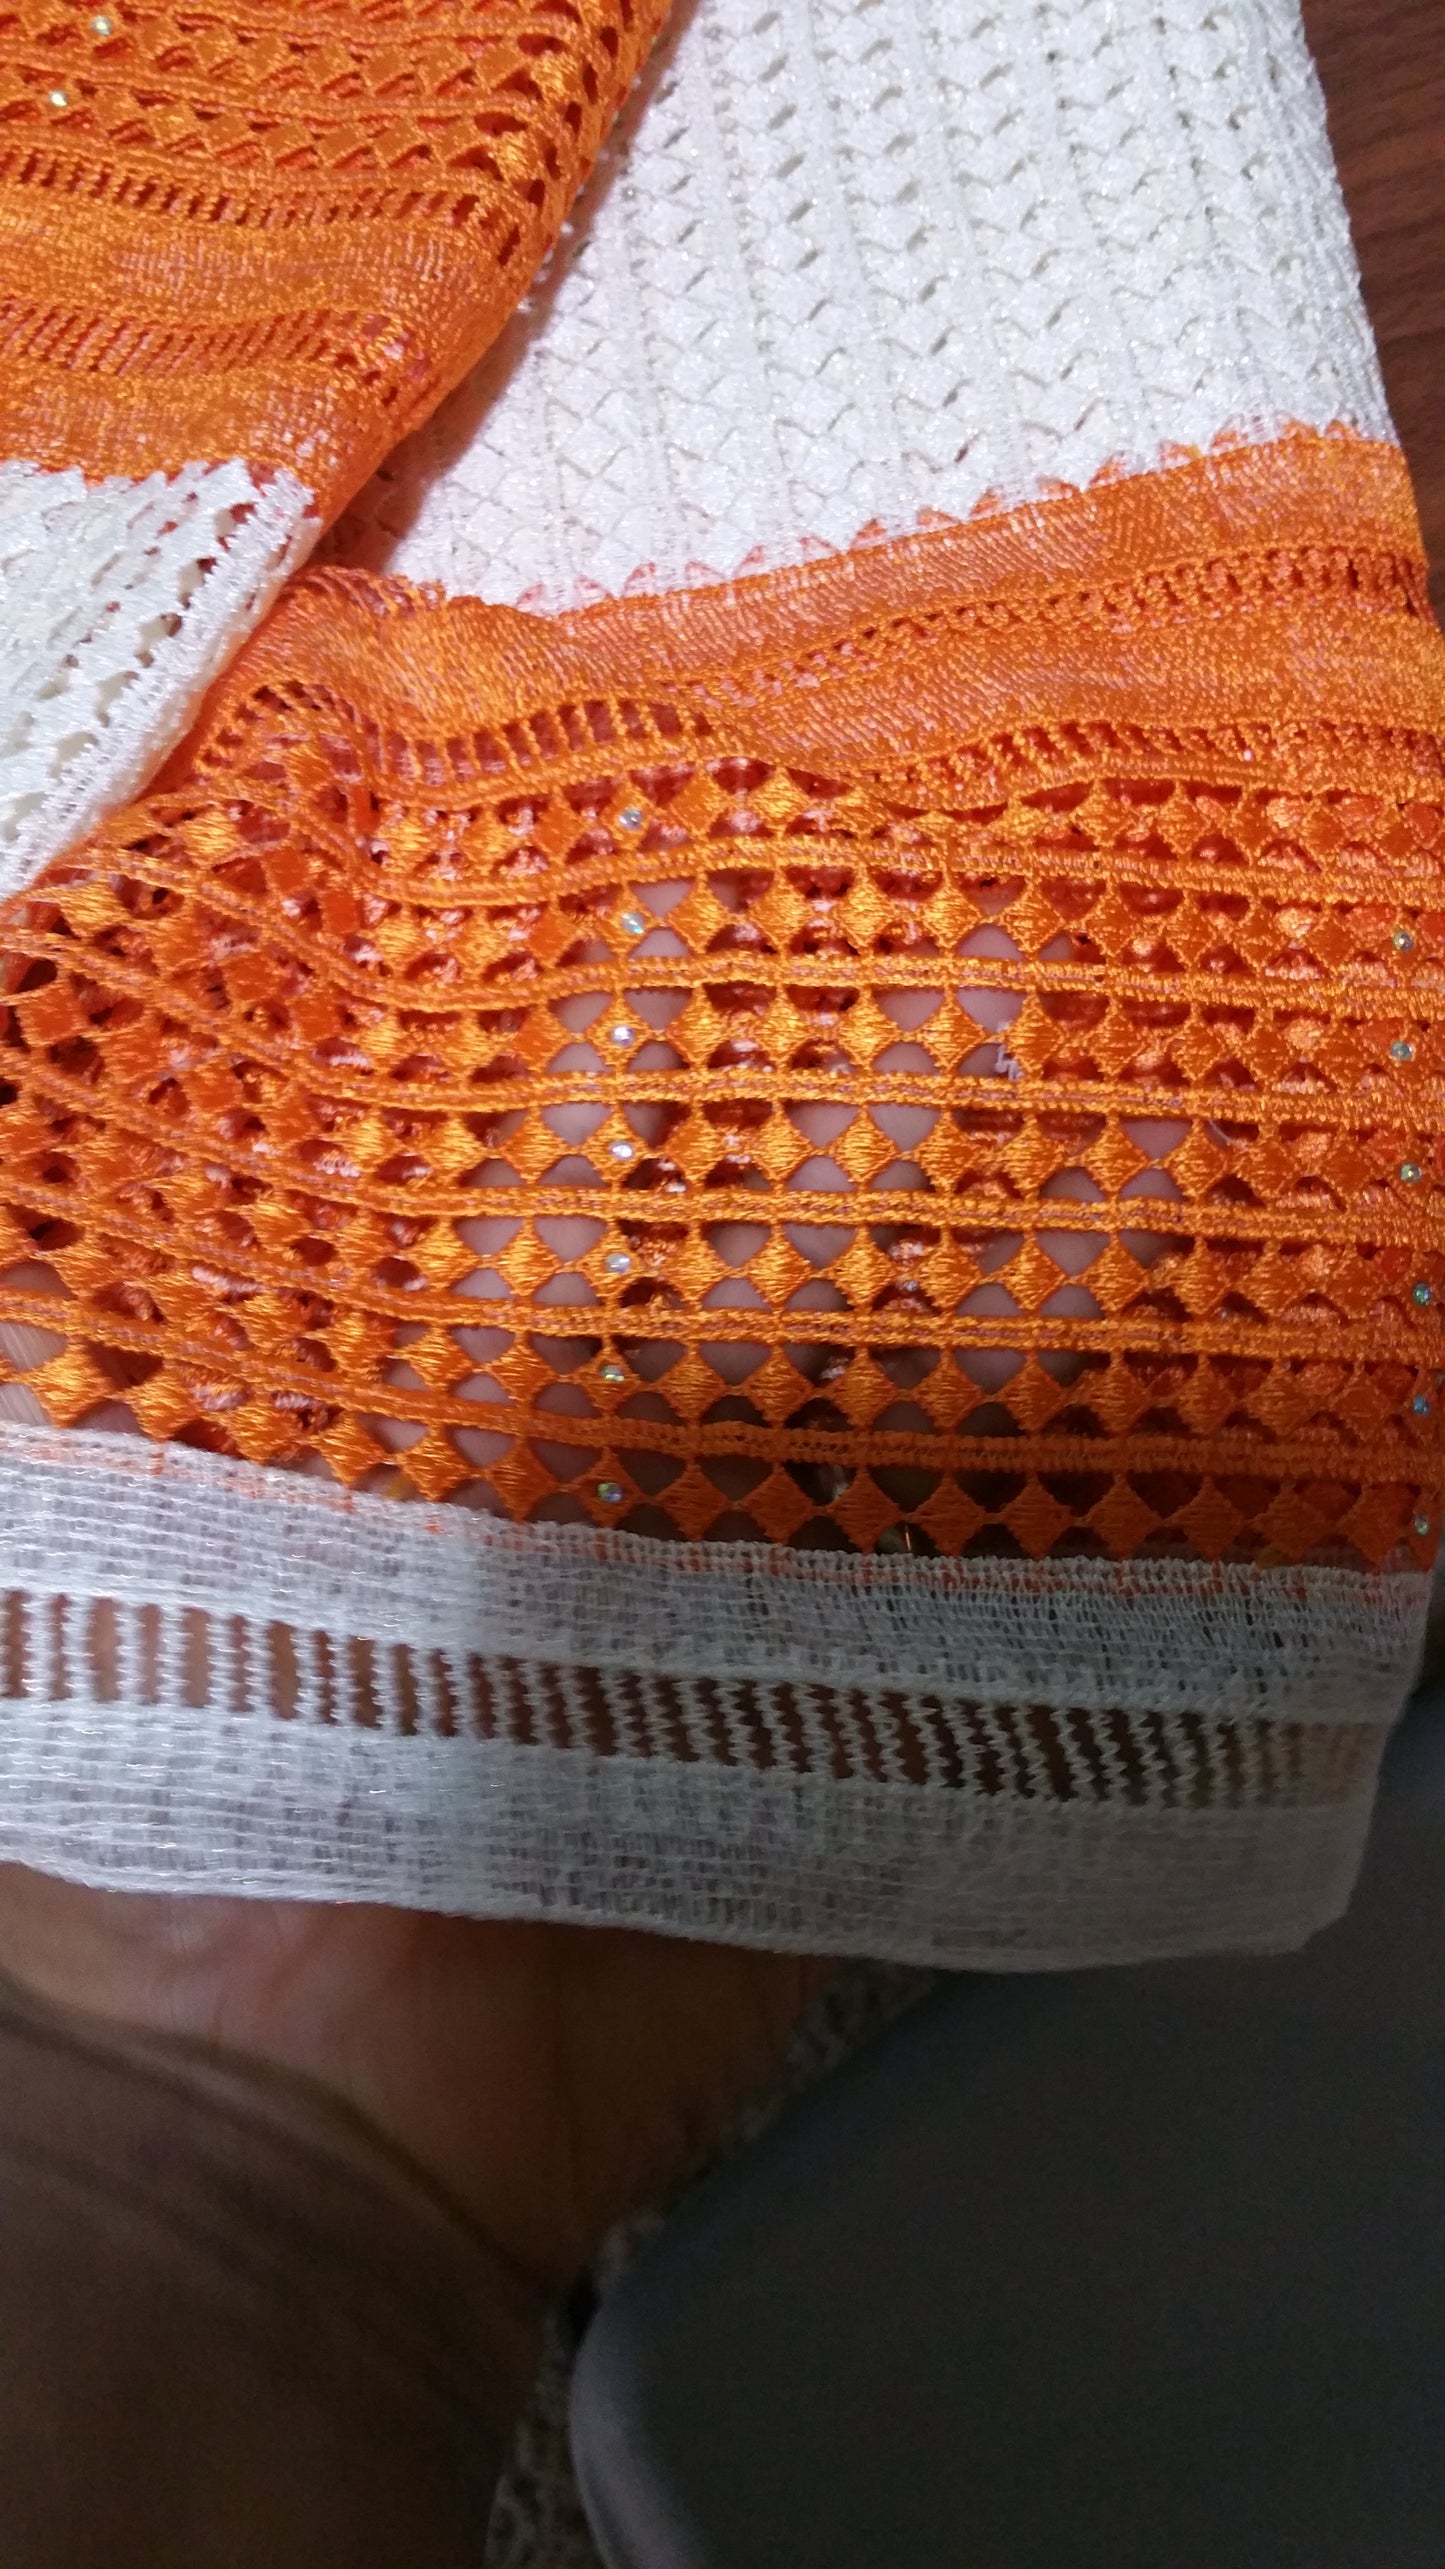 Clearance: Cream/Orange Cord-lace fabric for makimg Nigerian party dress. Sold per 5yds. Price is for 5 yds. Beautiful guipure-lace with stones